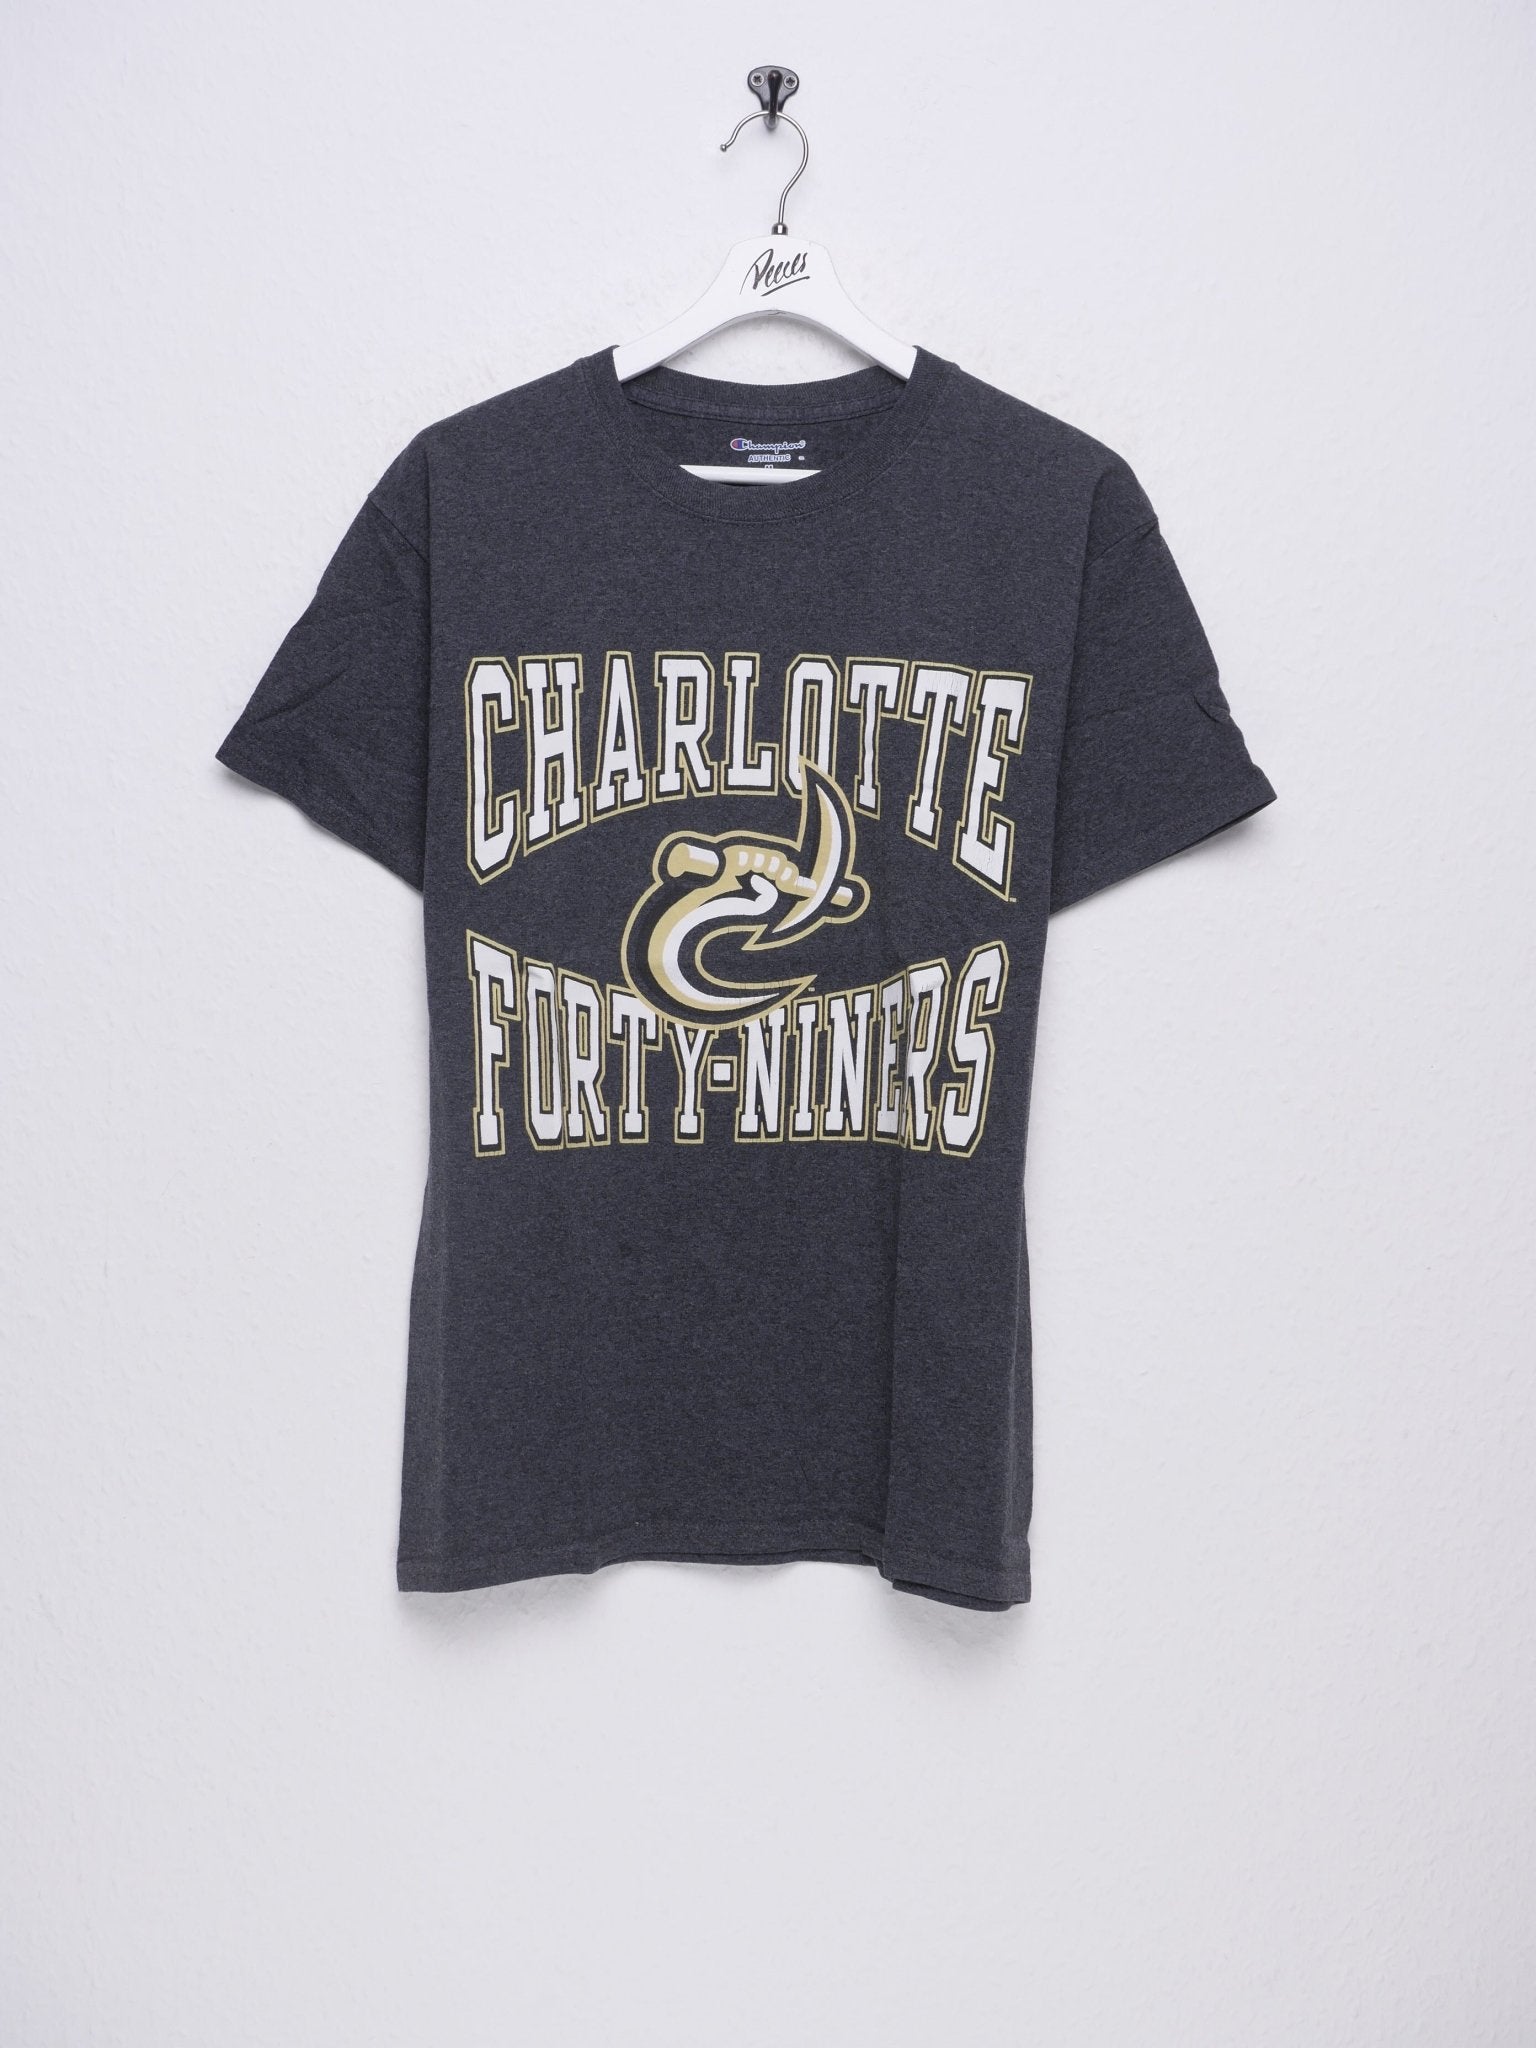 Champion Charlotte Forty-Niners embroidered Logo Shirt - Peeces